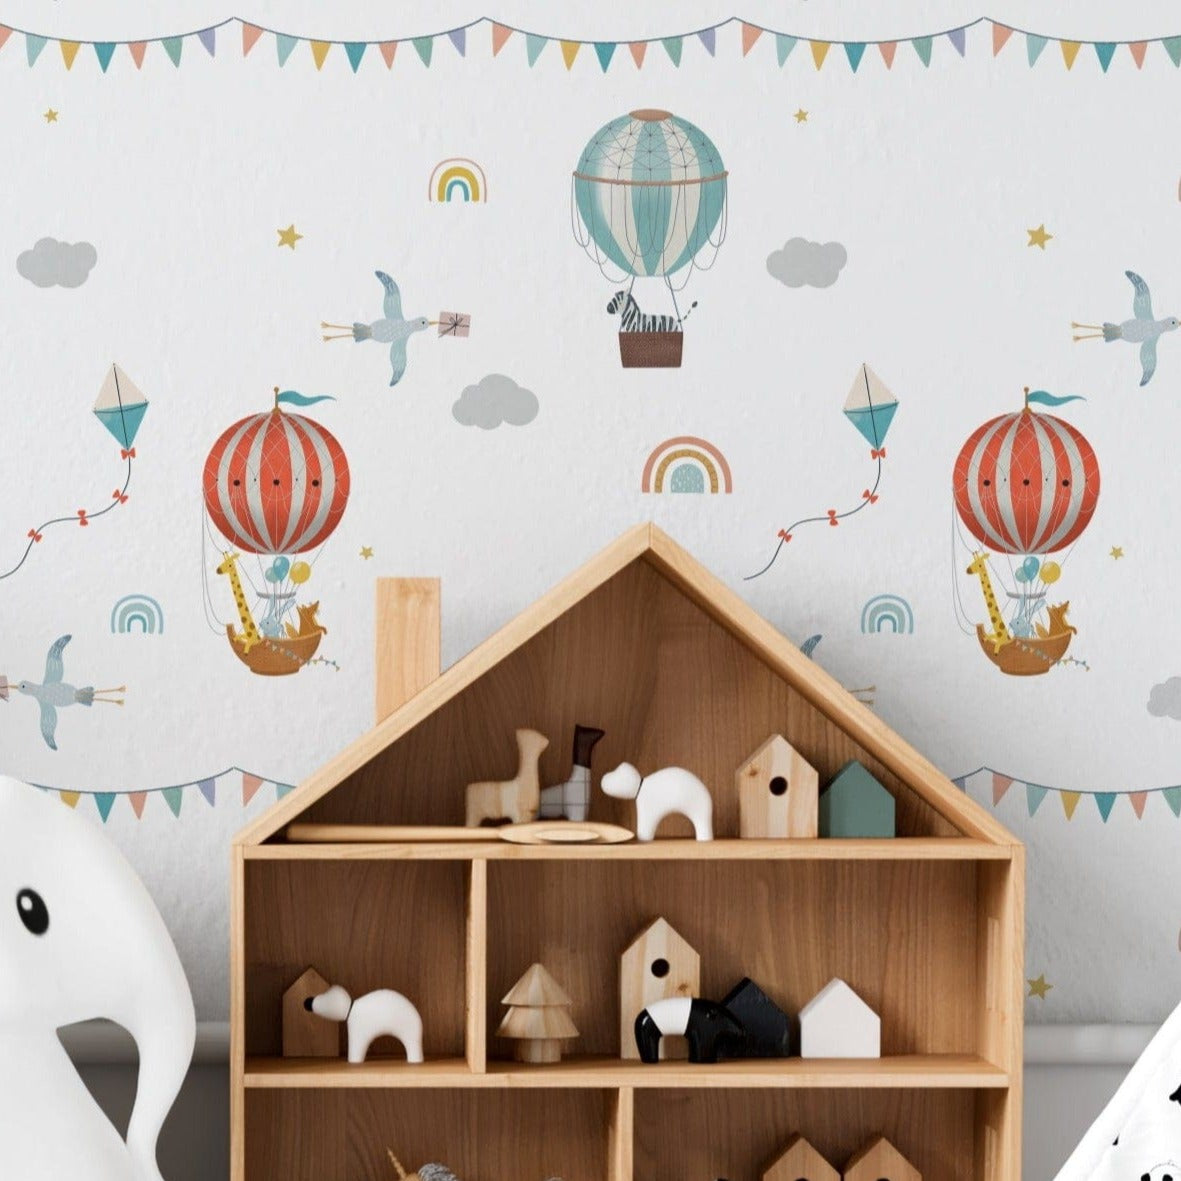 A playful nursery room featuring Balloon Adventure Wallpaper, adorned with whimsical illustrations of hot air balloons, kites, and clouds in pastel colors. The room is decorated with child-friendly furniture and toys, creating an imaginative space for little ones.